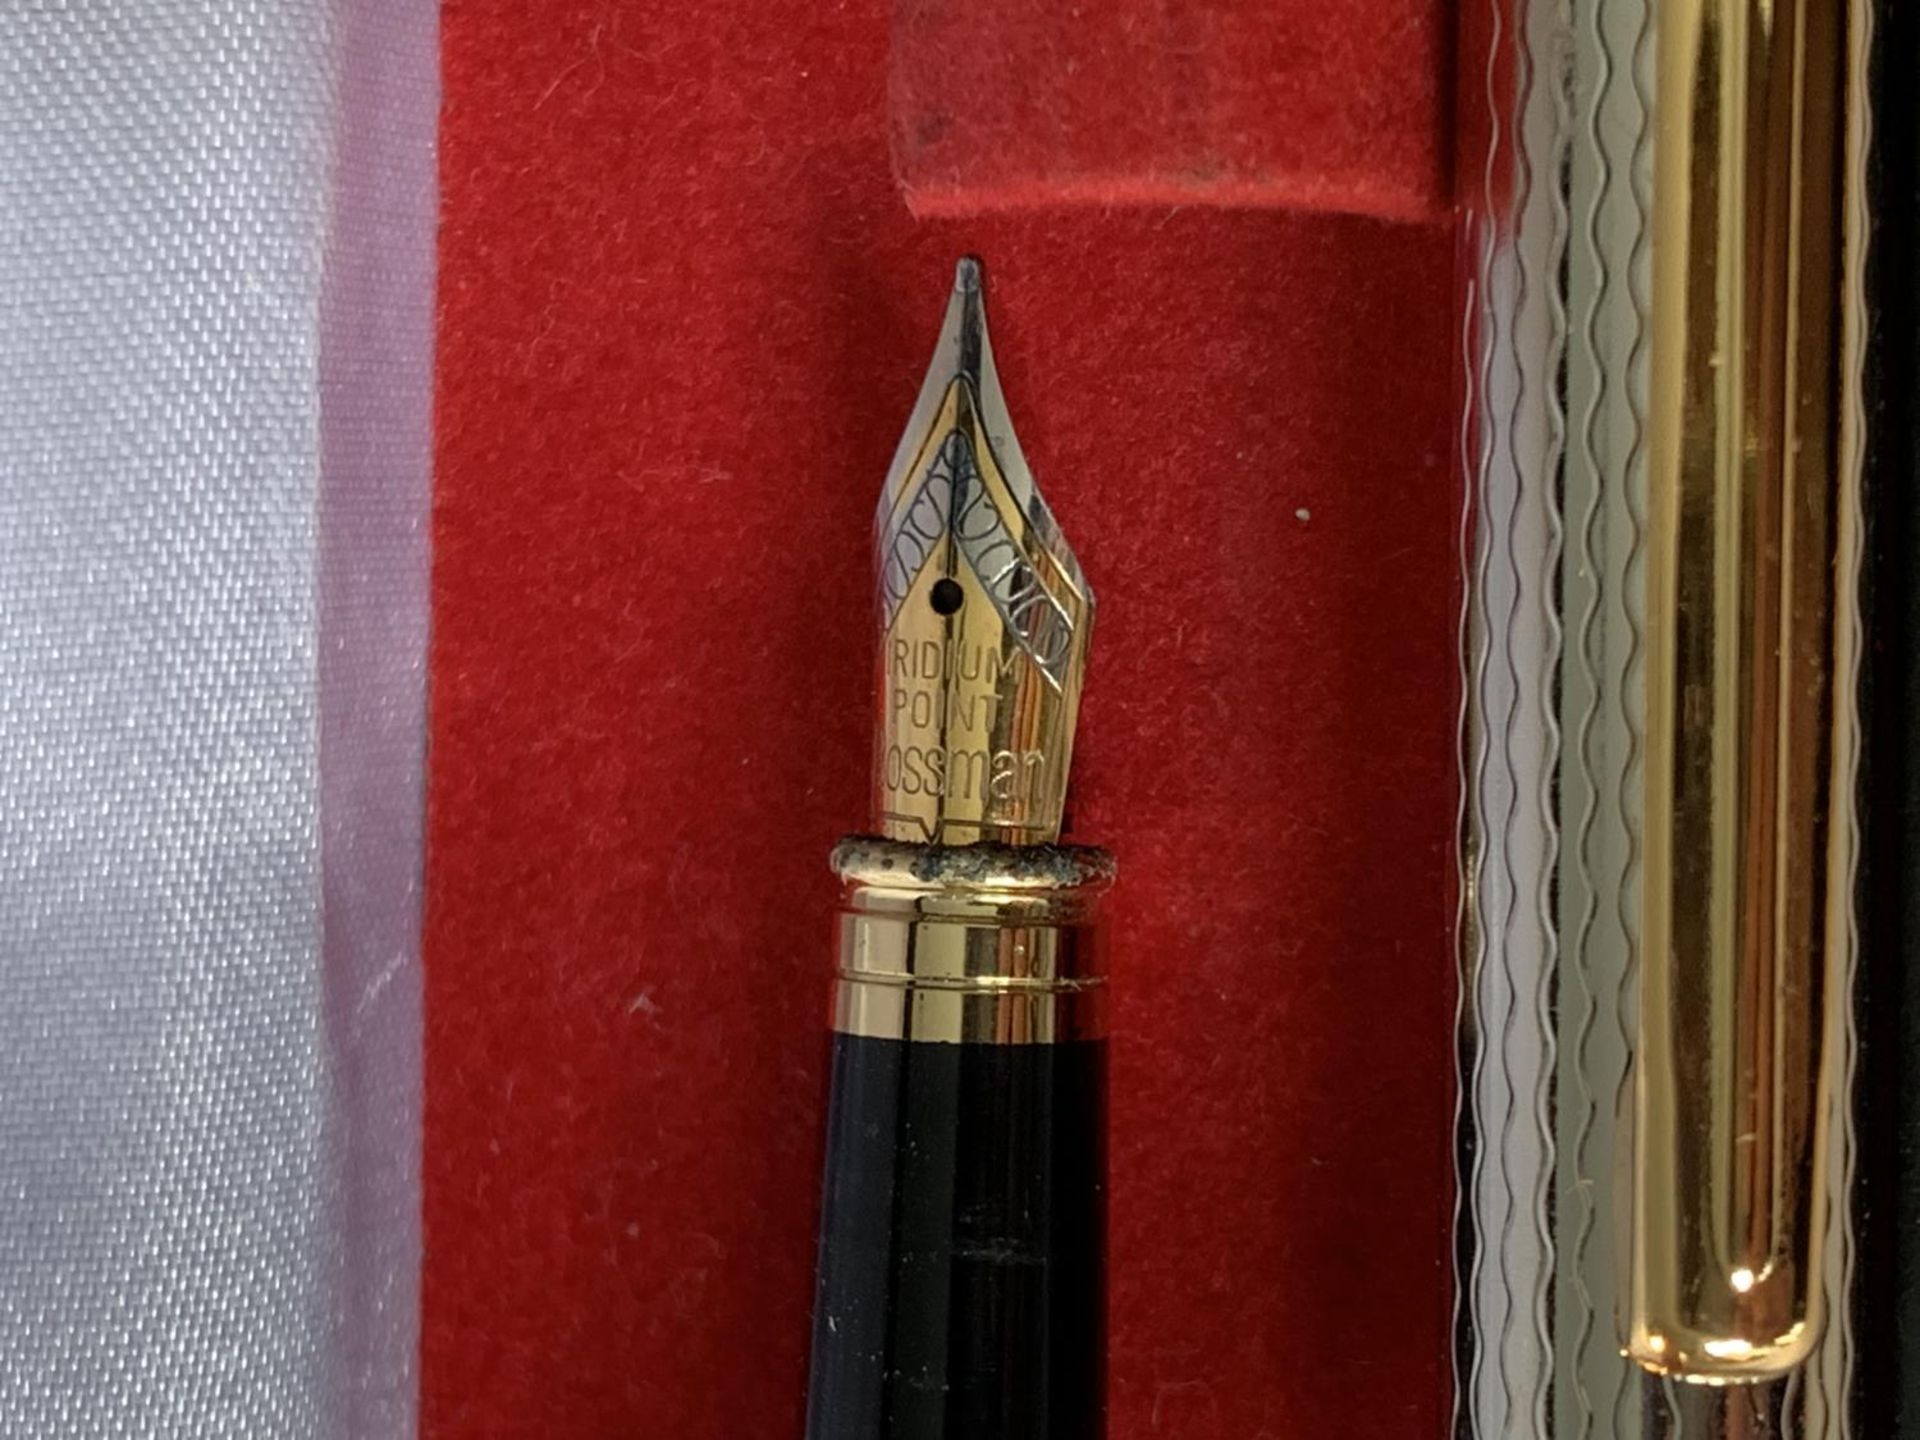 A BRITISH AEROSPACE FOUNTAIN PEN BOXED IN COMMEMORATION OF THE PRODUCTION LAUNCH OF EURO FIGHTER - Image 3 of 4